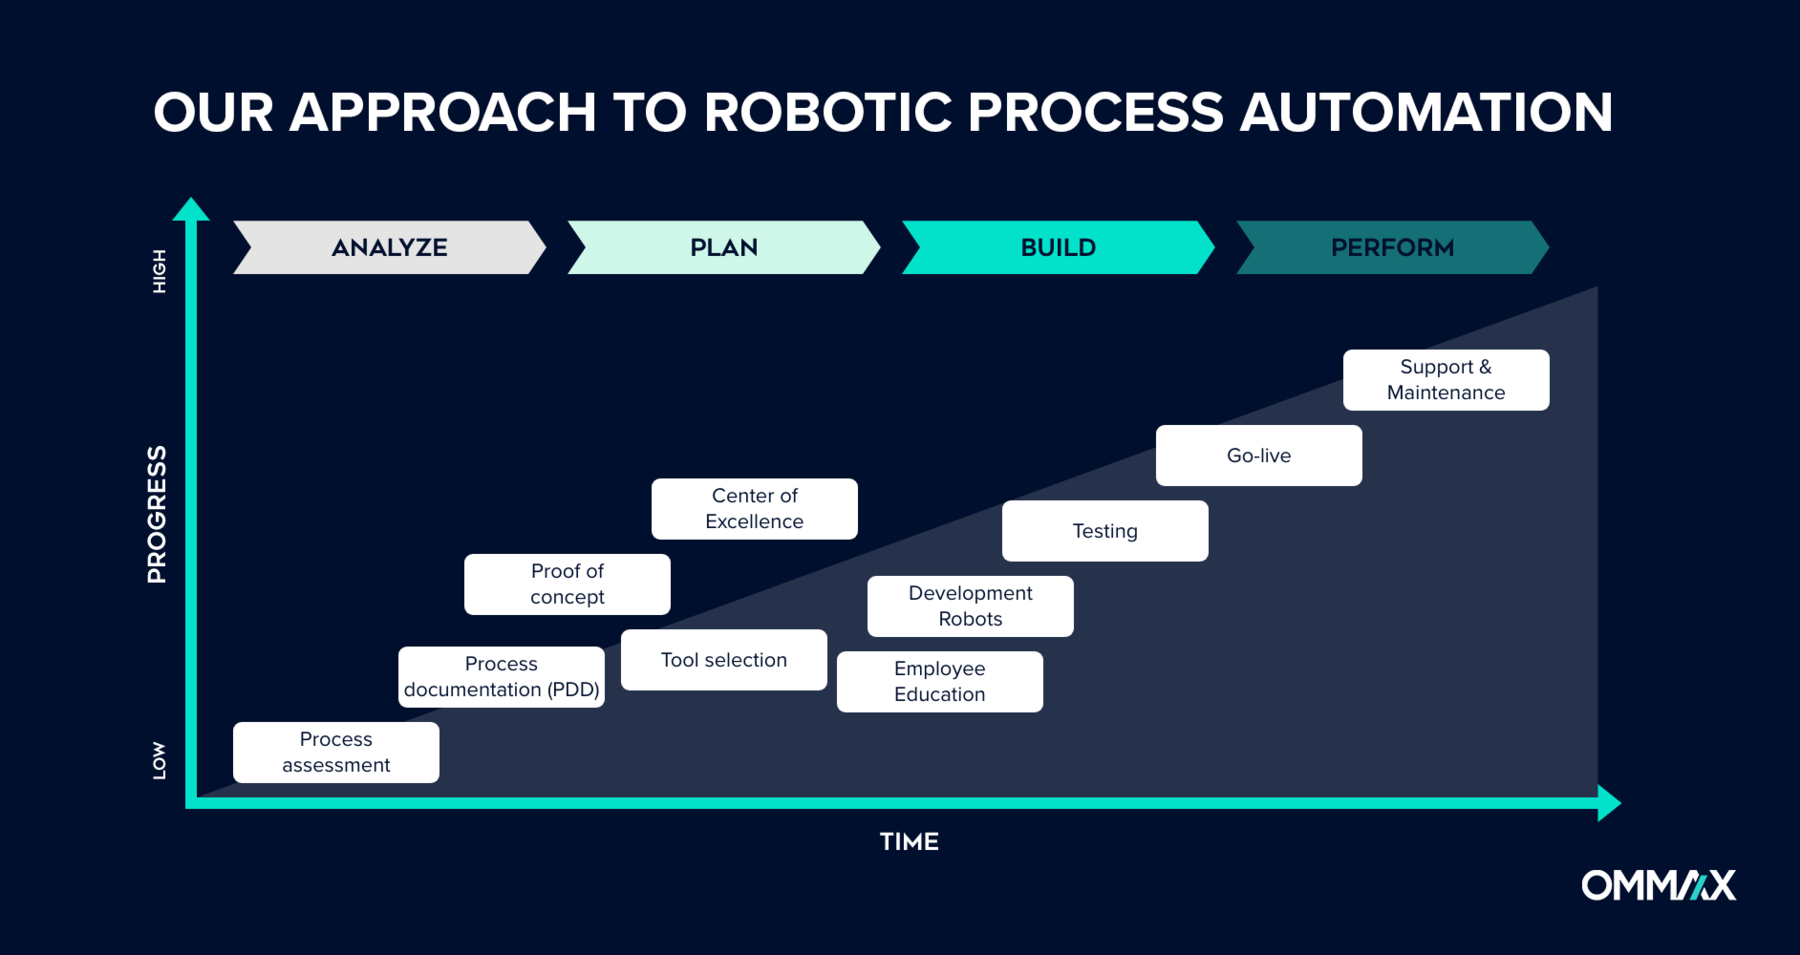 OMMAX's approach to robotic process automation (RPA)